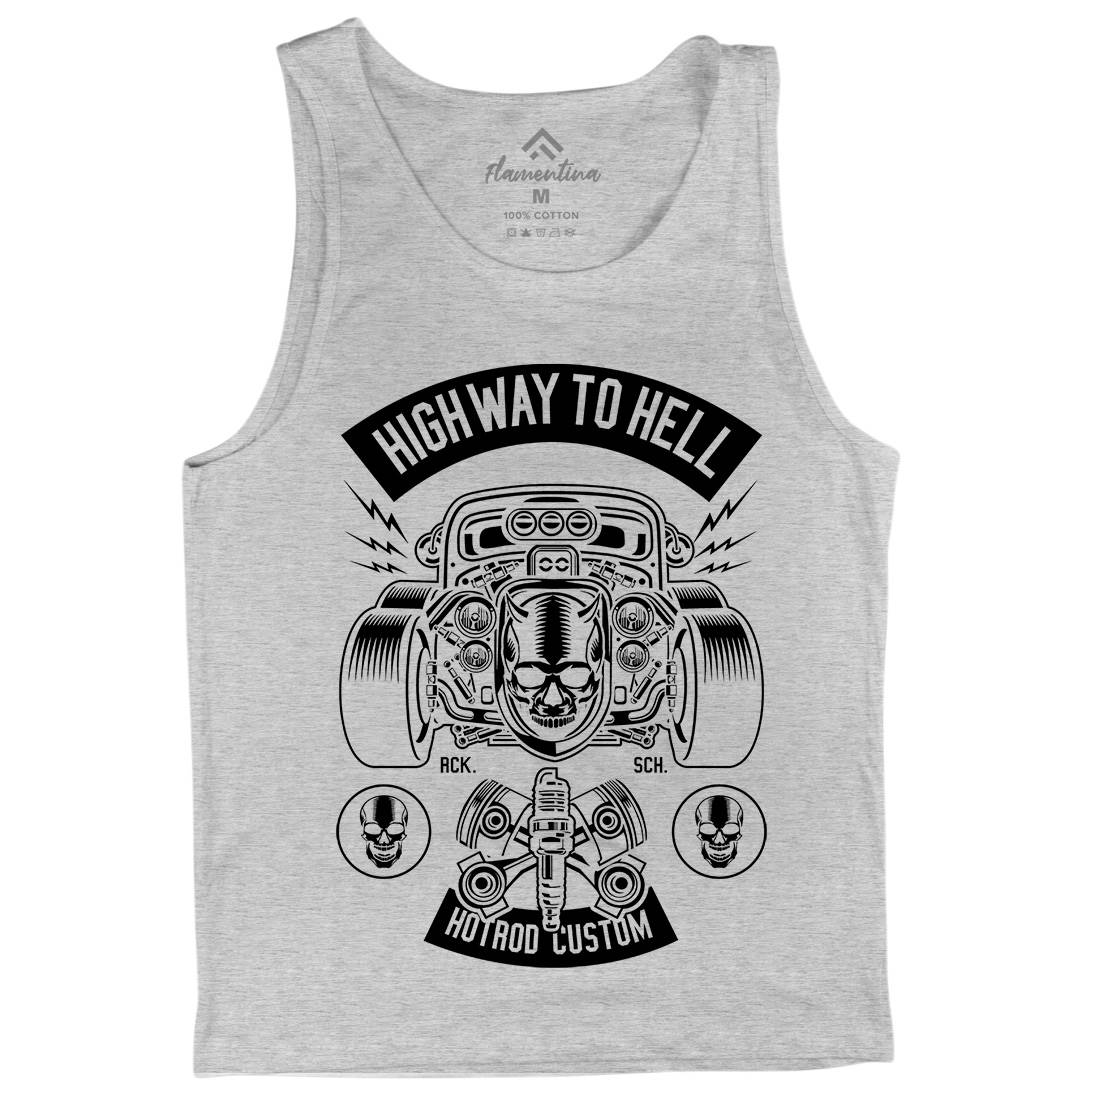 Highway To Hell Mens Tank Top Vest Cars B556